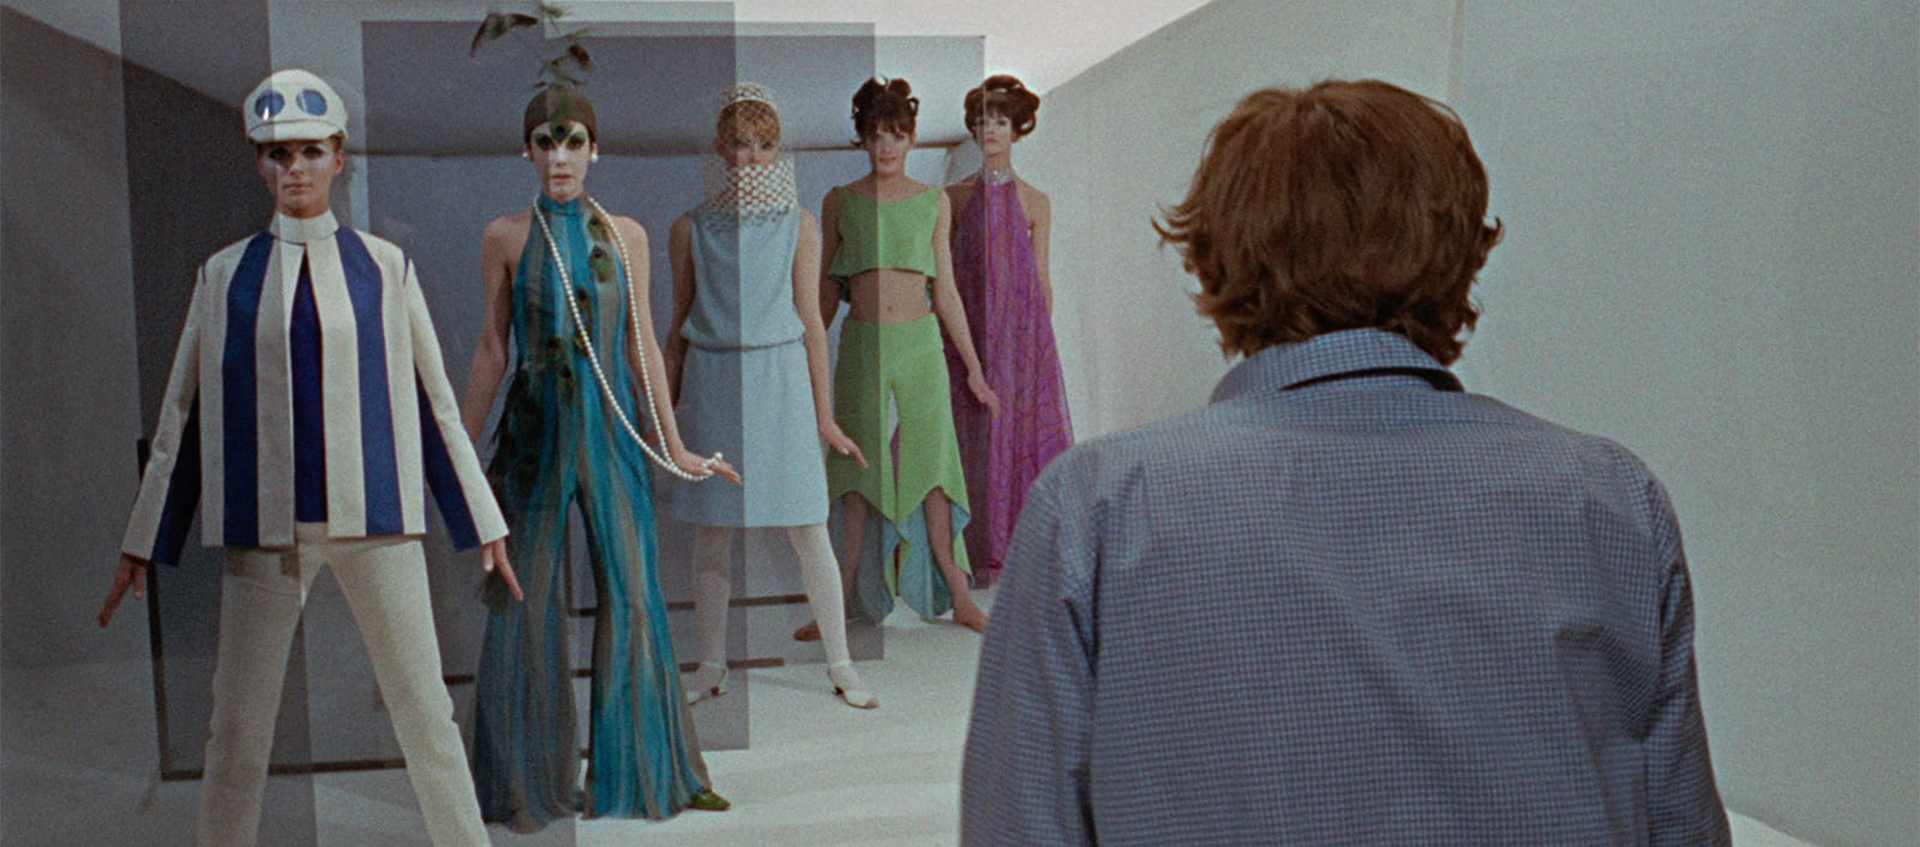 A man in a blue shirt and shaggy hair stands with his back to us. He is looking forward at a row of five fashion models in stylish, mid-1960s mod attire